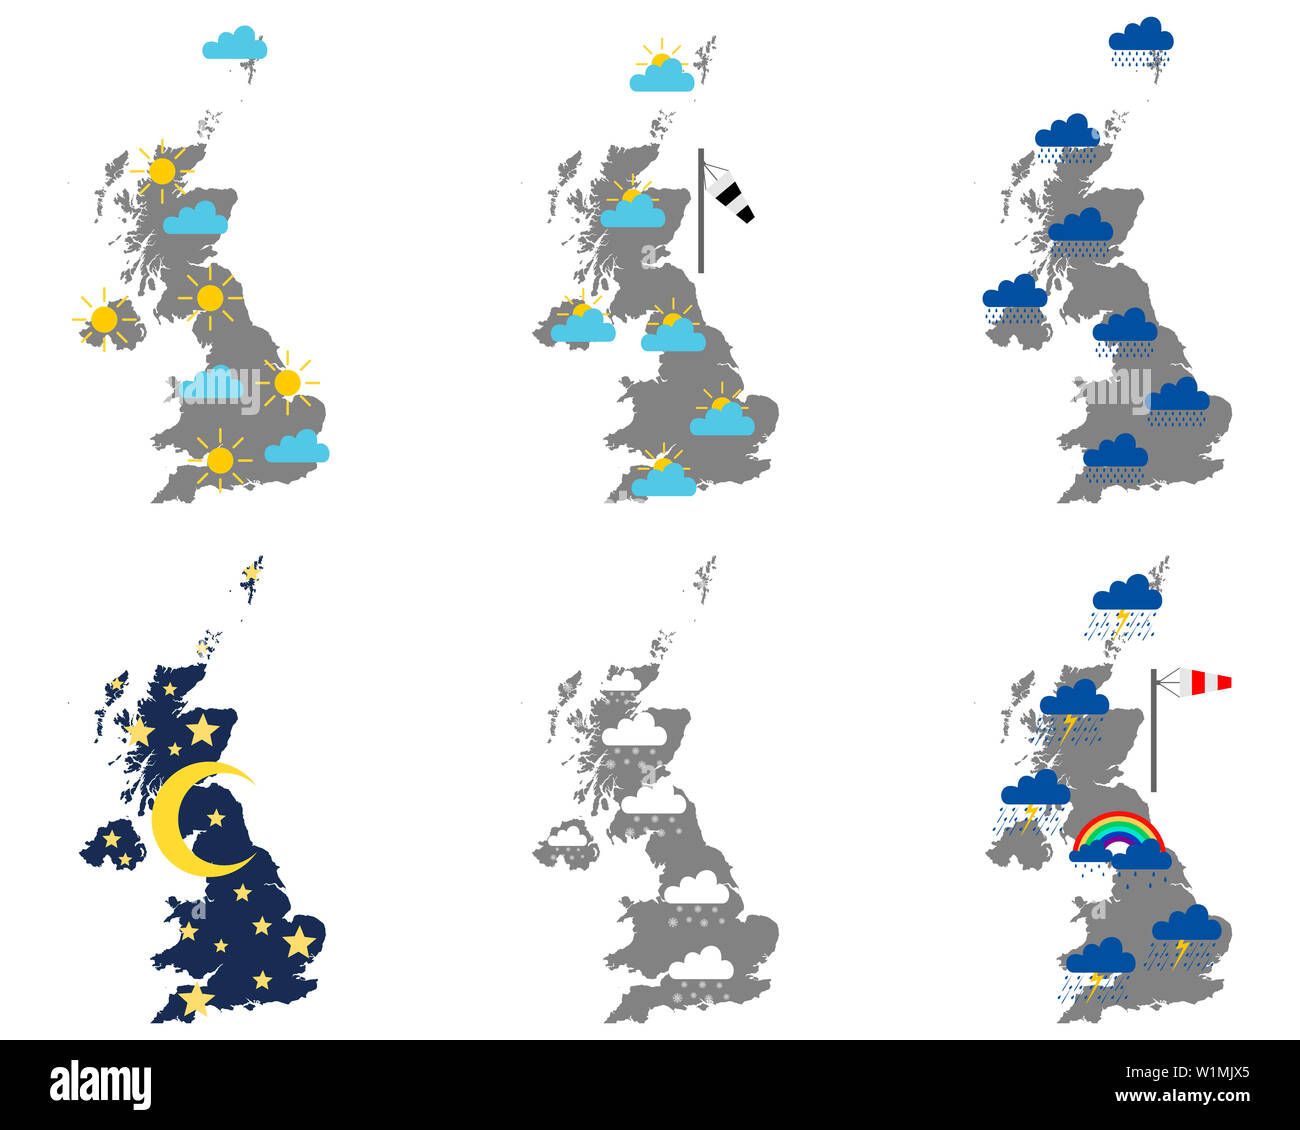 Maps of Great Britain with various weather symbols Stock Photo